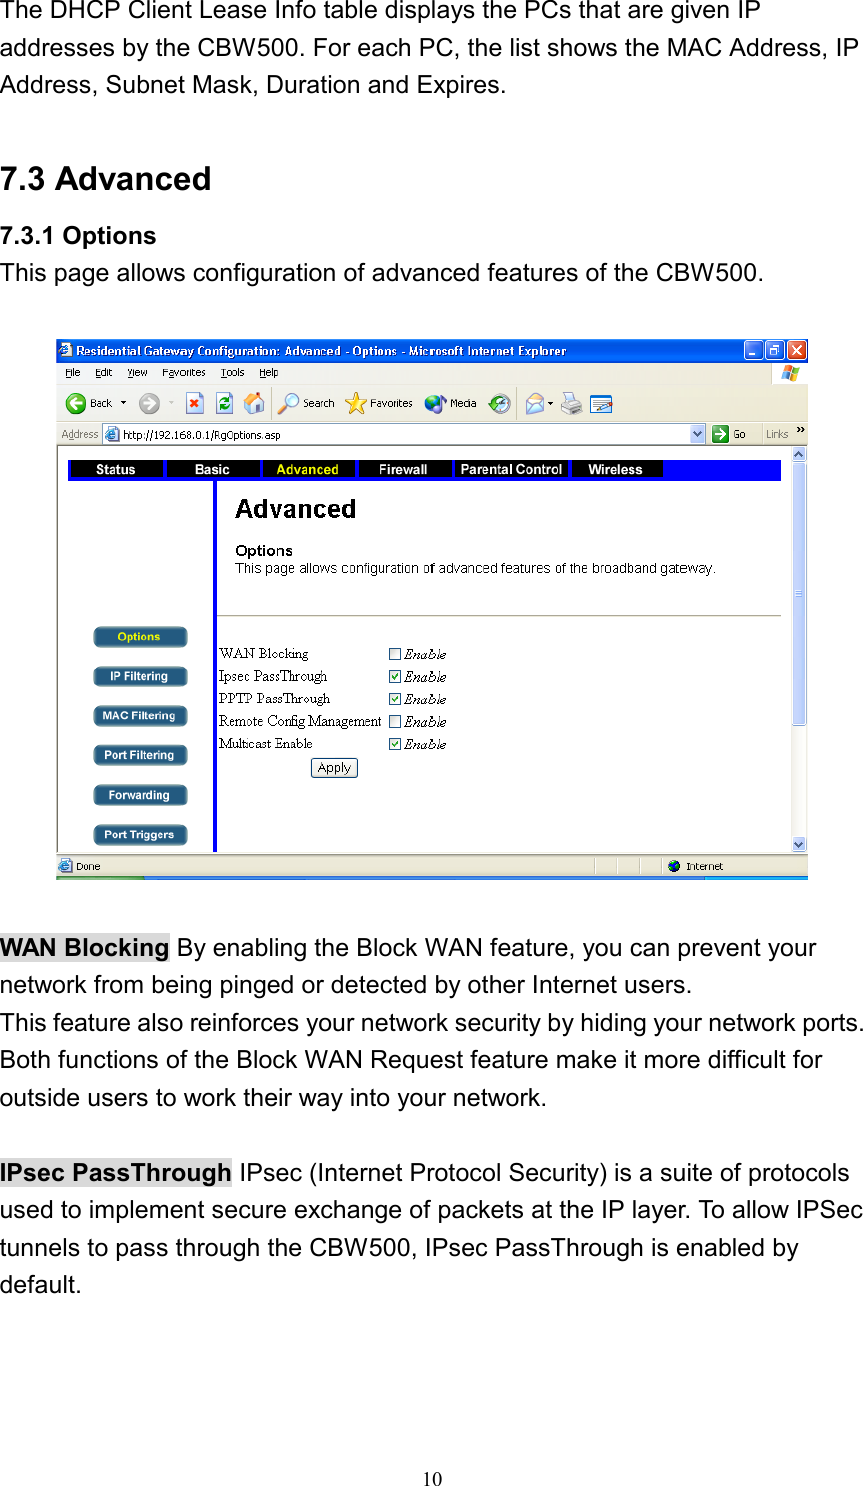 The DHCP Client Lease Info table displays the PCs that are given IP addresses by the CBW500. For each PC, the list shows the MAC Address, IP Address, Subnet Mask, Duration and Expires.  7.3 Advanced 7.3.1 Options This page allows configuration of advanced features of the CBW500.    WAN Blocking By enabling the Block WAN feature, you can prevent your network from being pinged or detected by other Internet users. This feature also reinforces your network security by hiding your network ports. Both functions of the Block WAN Request feature make it more difficult for outside users to work their way into your network.  IPsec PassThrough IPsec (Internet Protocol Security) is a suite of protocols used to implement secure exchange of packets at the IP layer. To allow IPSec tunnels to pass through the CBW500, IPsec PassThrough is enabled by default.  10